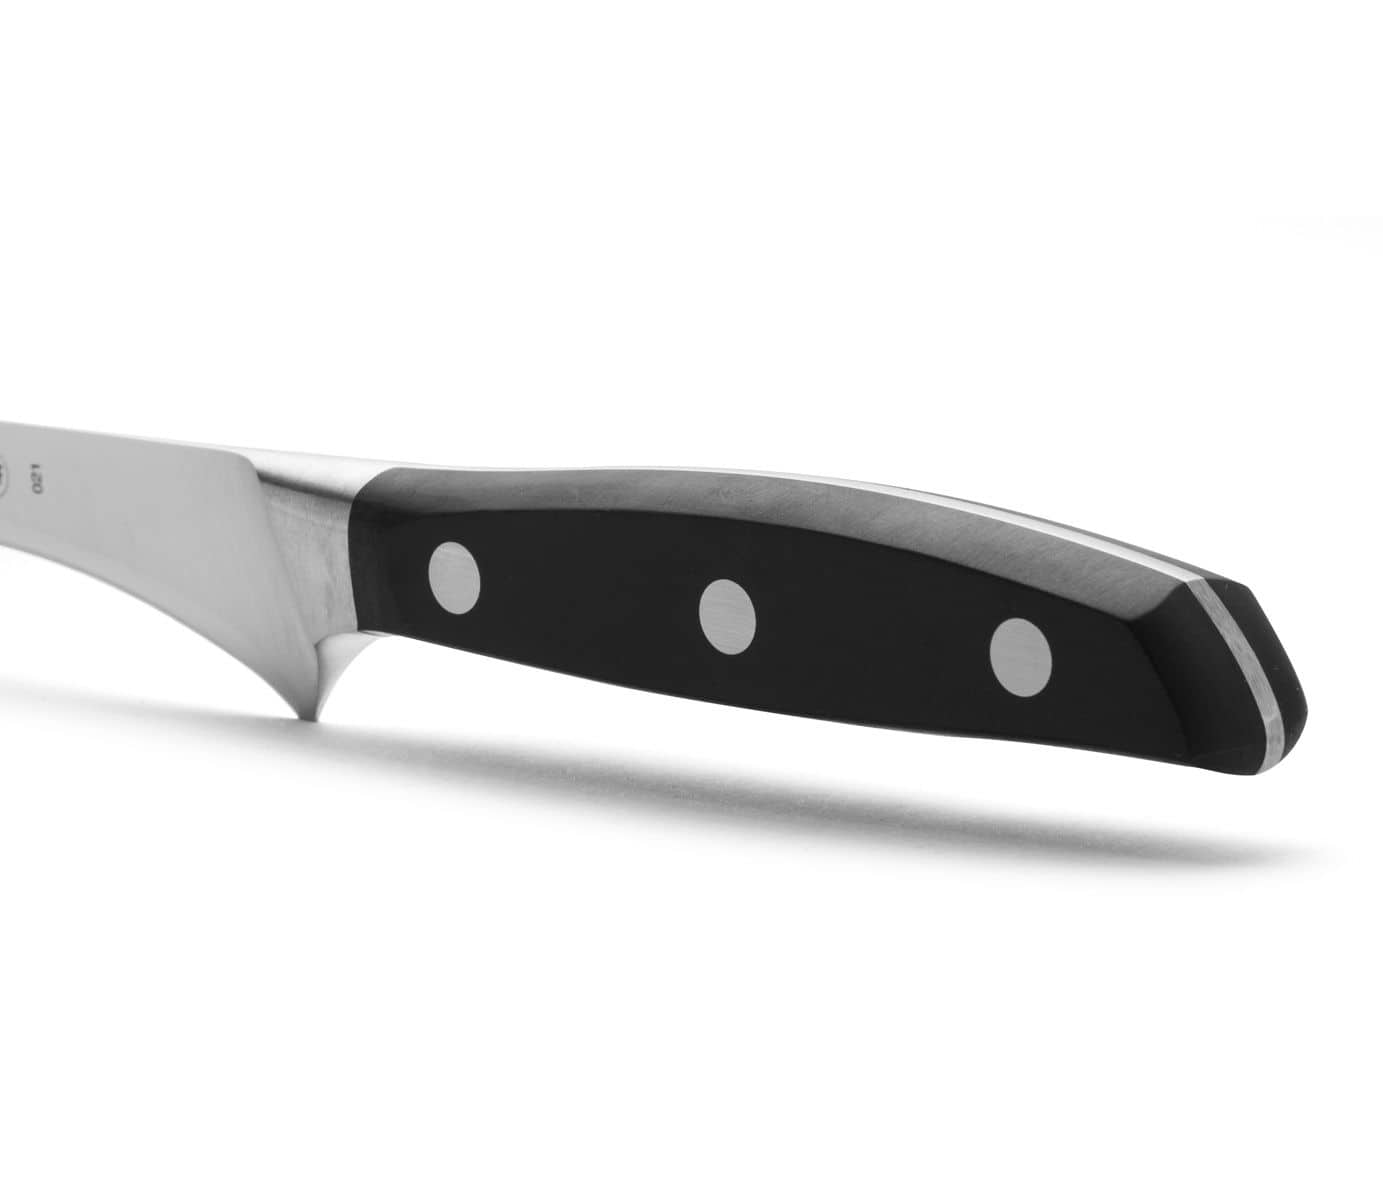 ARCOS Carving Knife 10 Inch Stainless Steel. Ham Slicer Knife for Cutting  Ham and Meat. Ergonomic Polyoxymethylene Handle and 250mm Blade. Series